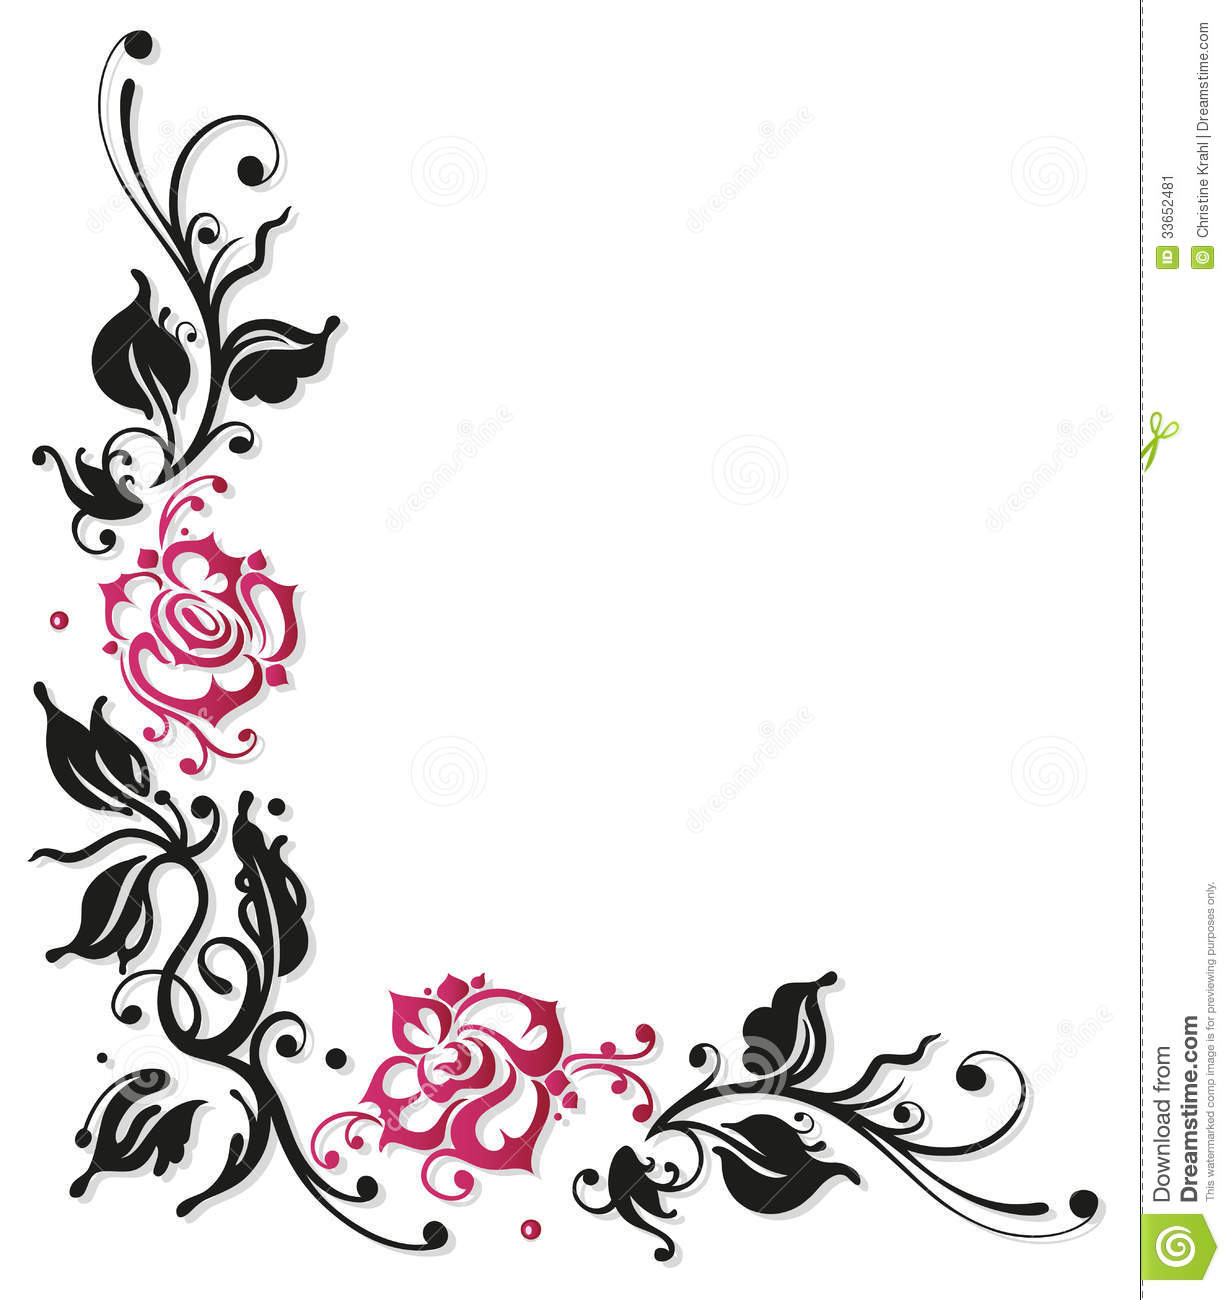 Black white and pink clipart.